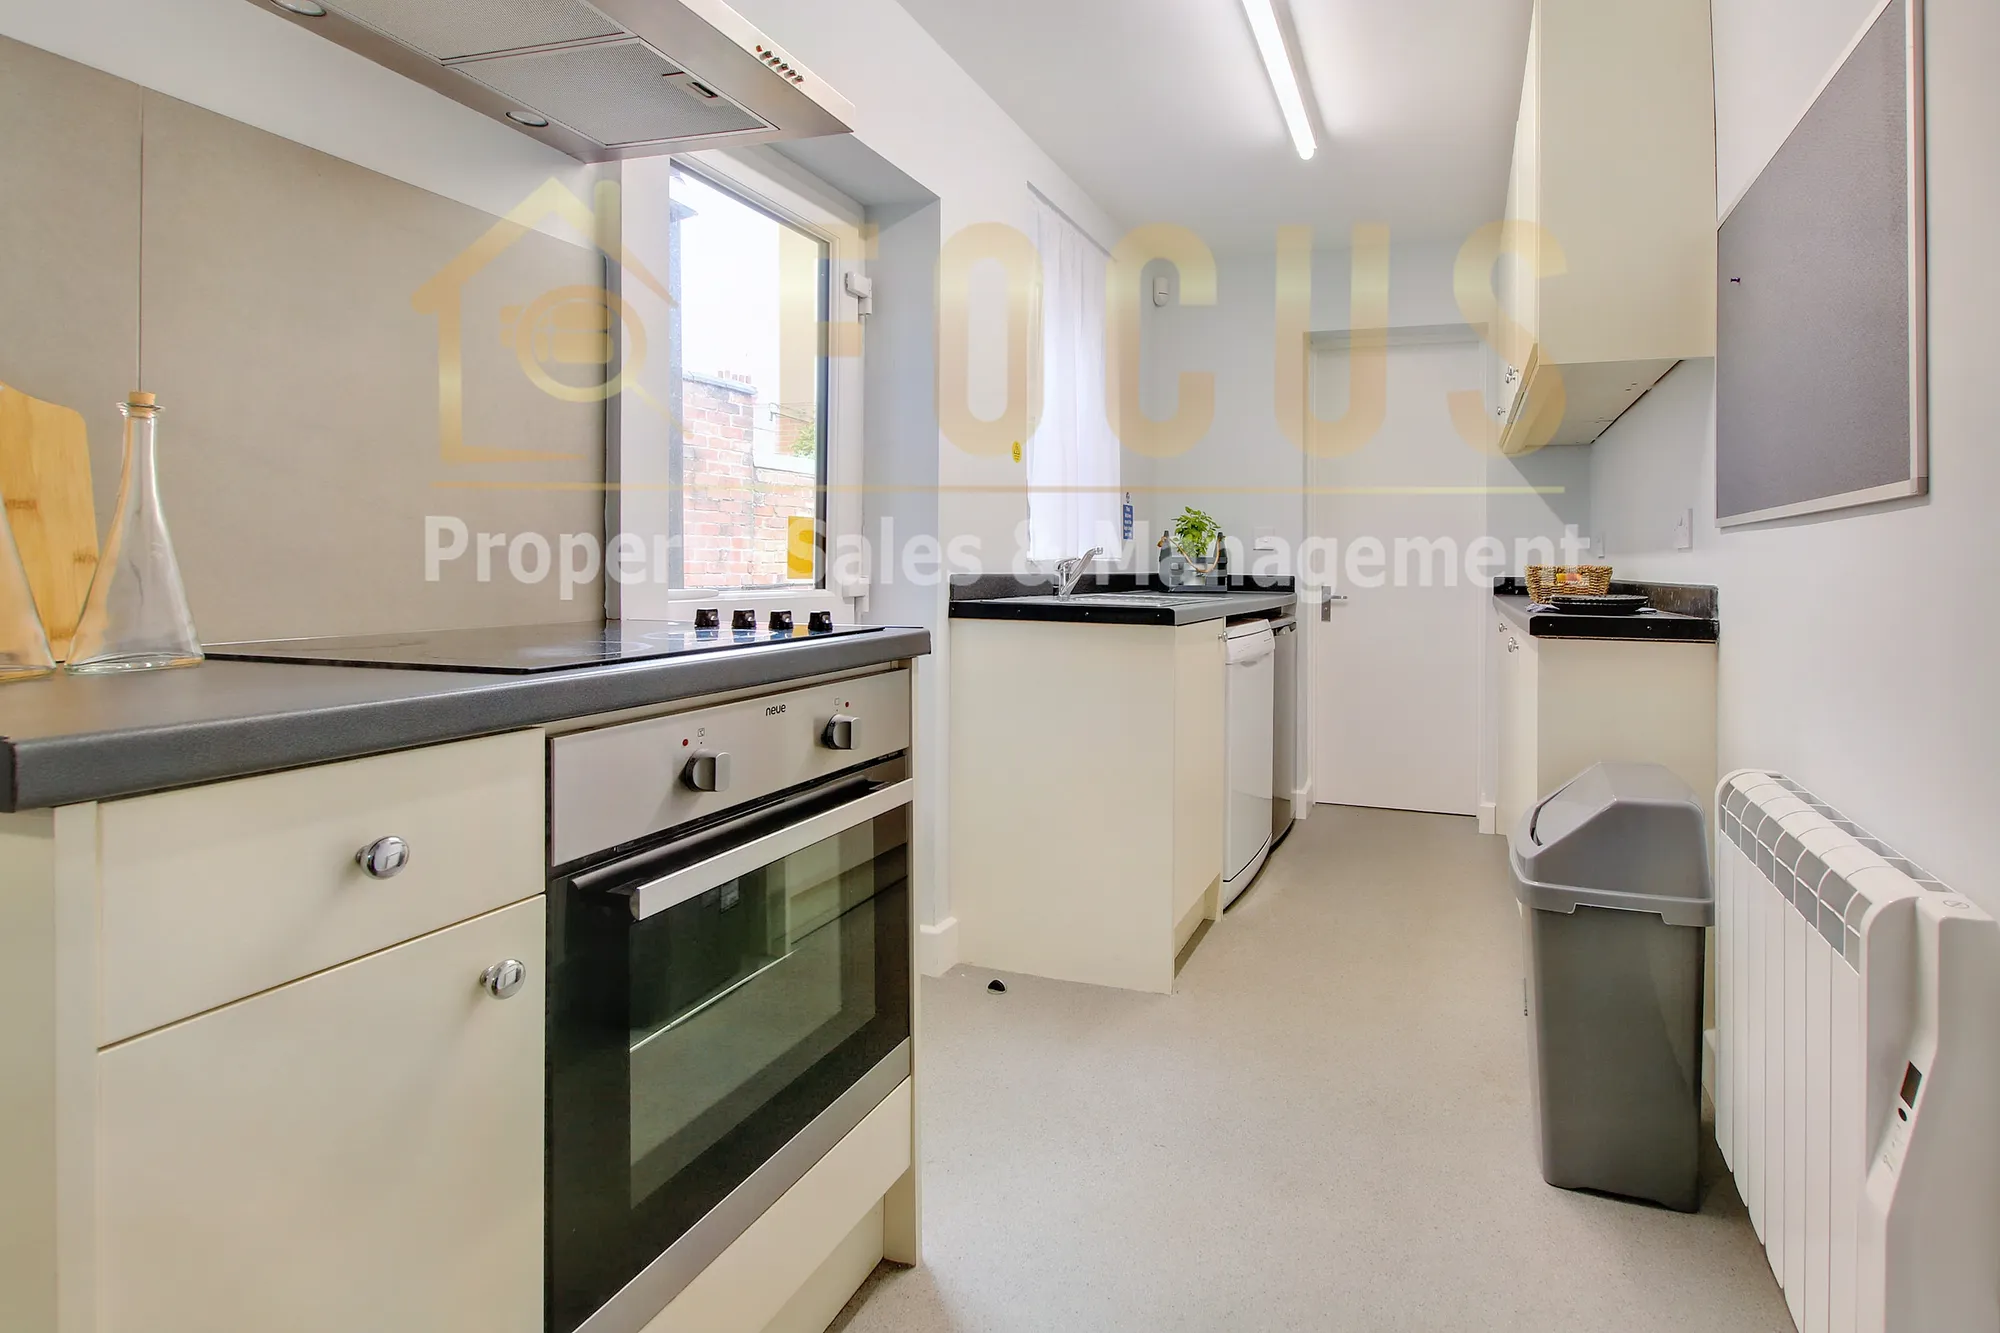 2 bed ground floor flat to rent in Fleetwood Road, Leicester  - Property Image 3